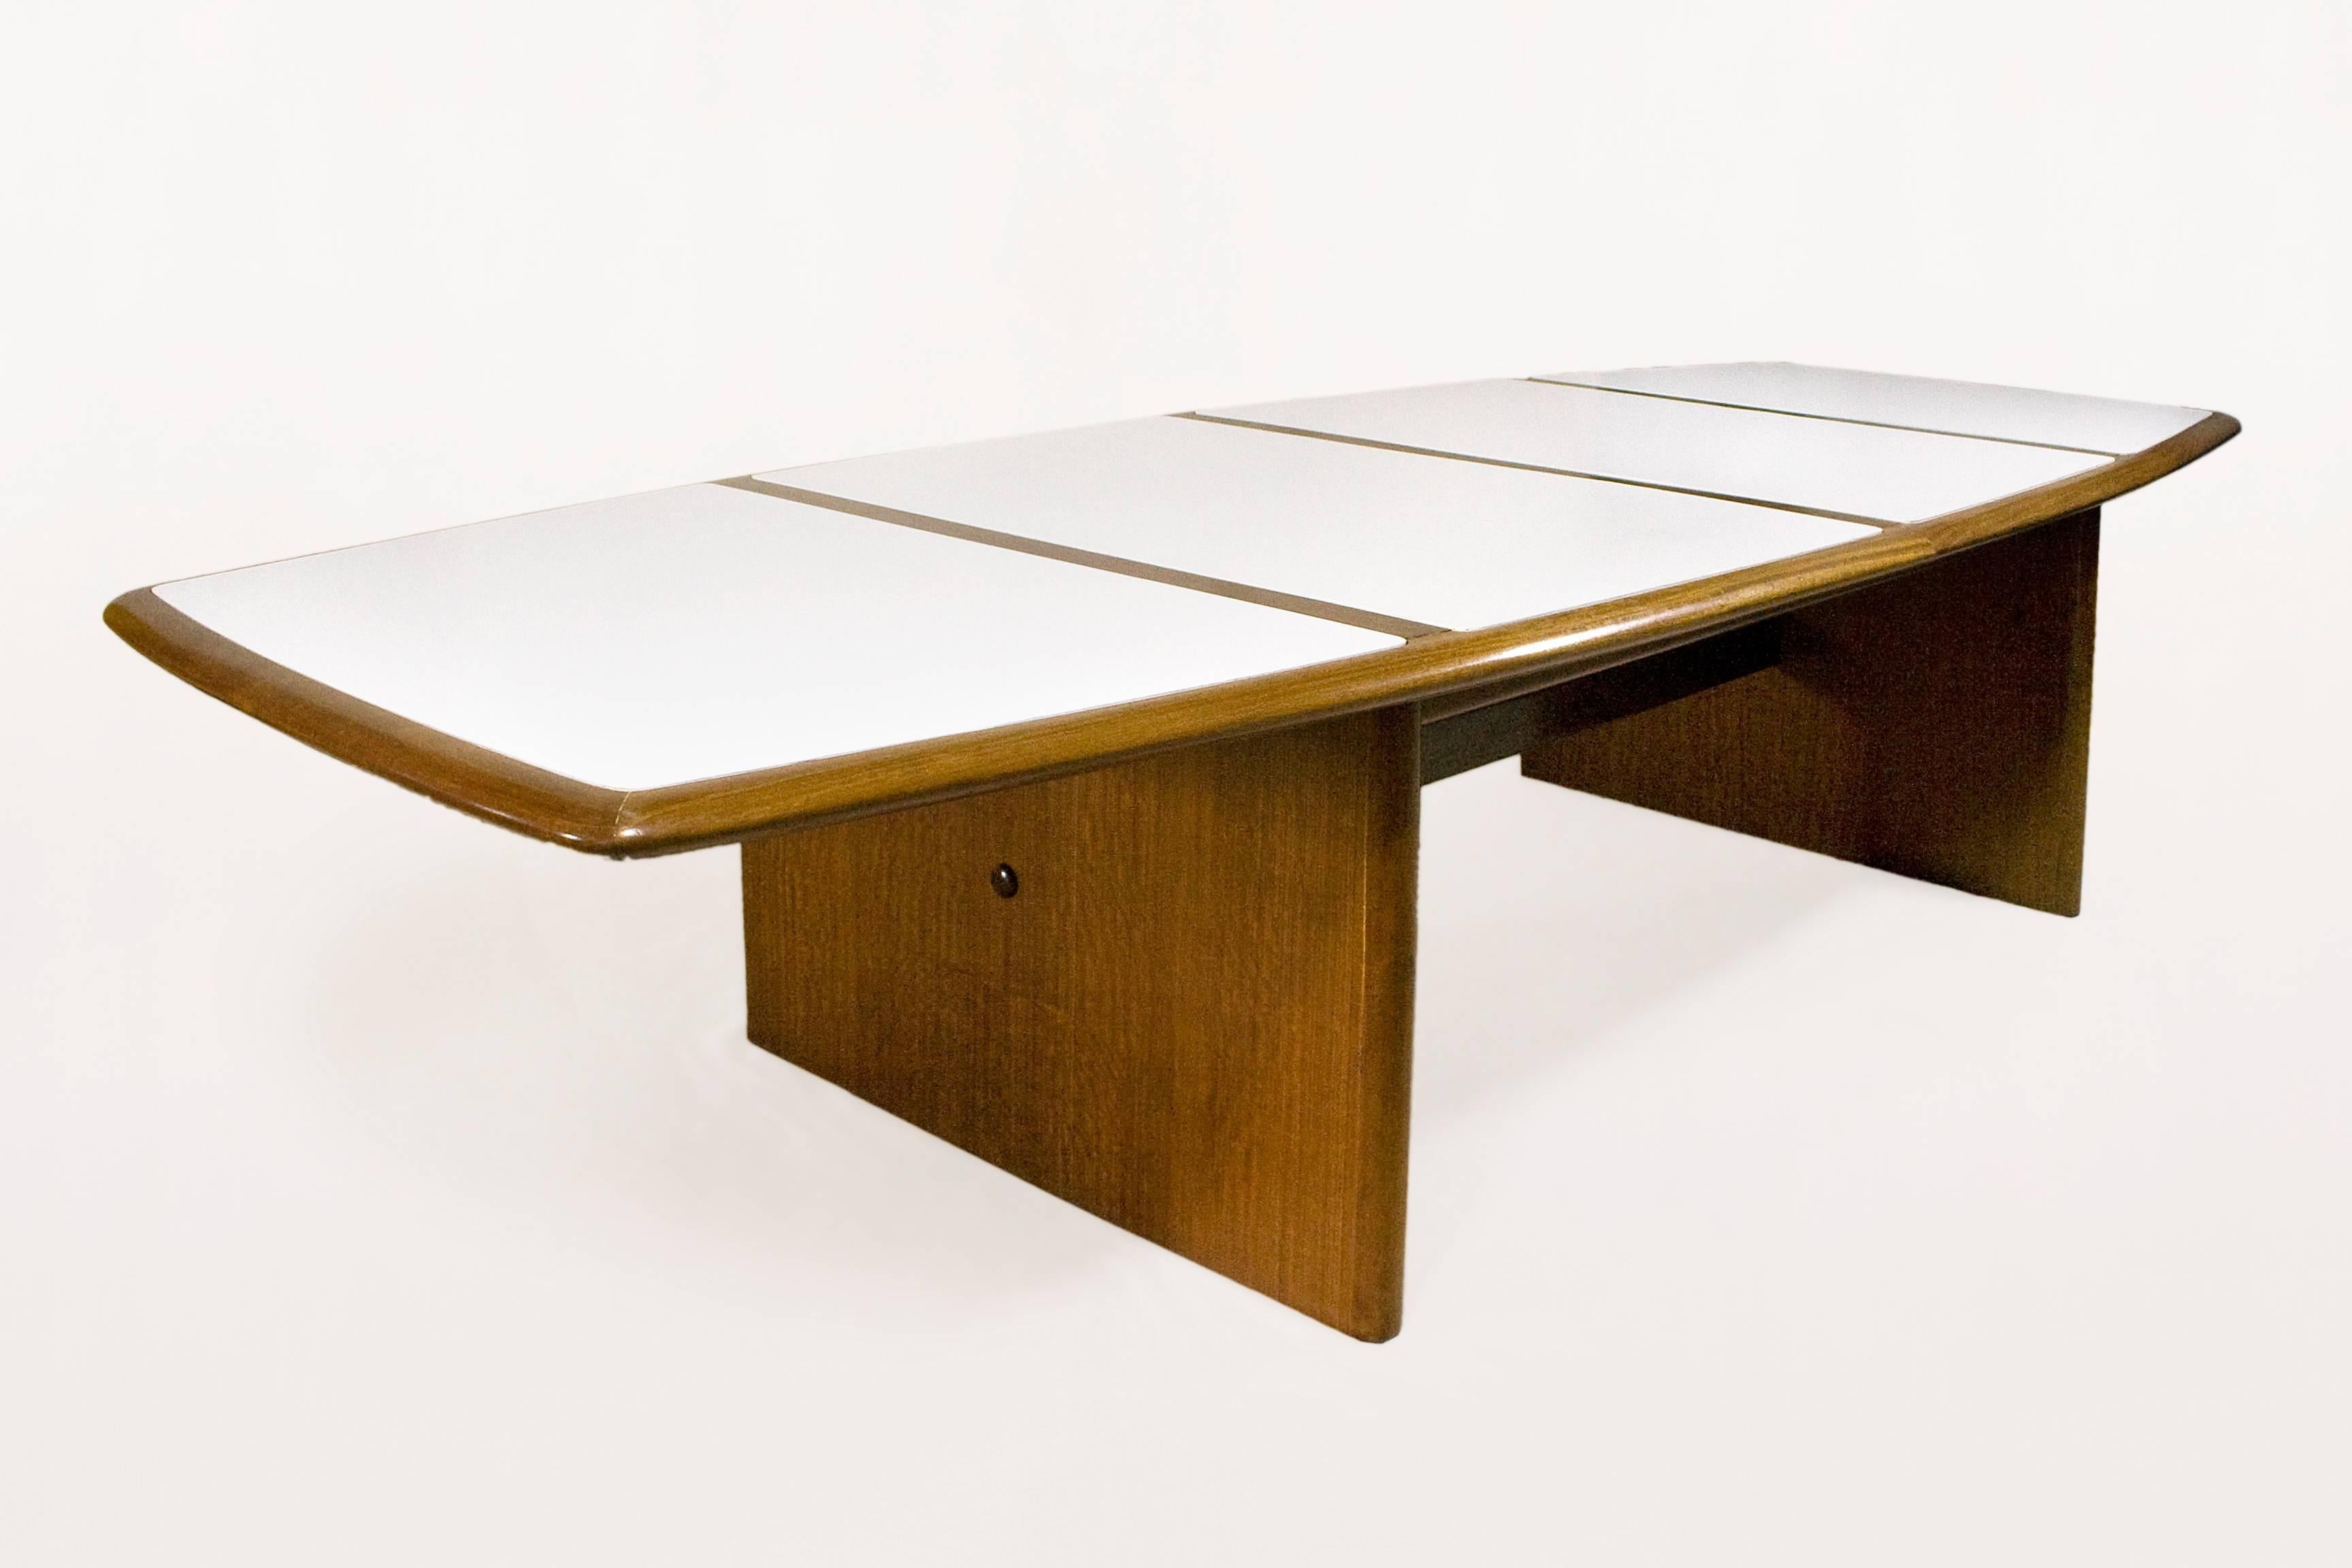 Monumental, Modern Danish dining table.
Exceptional size.
Teak wood and white Formica.
circa 1960, Denmark.
Excellent vintage condition.